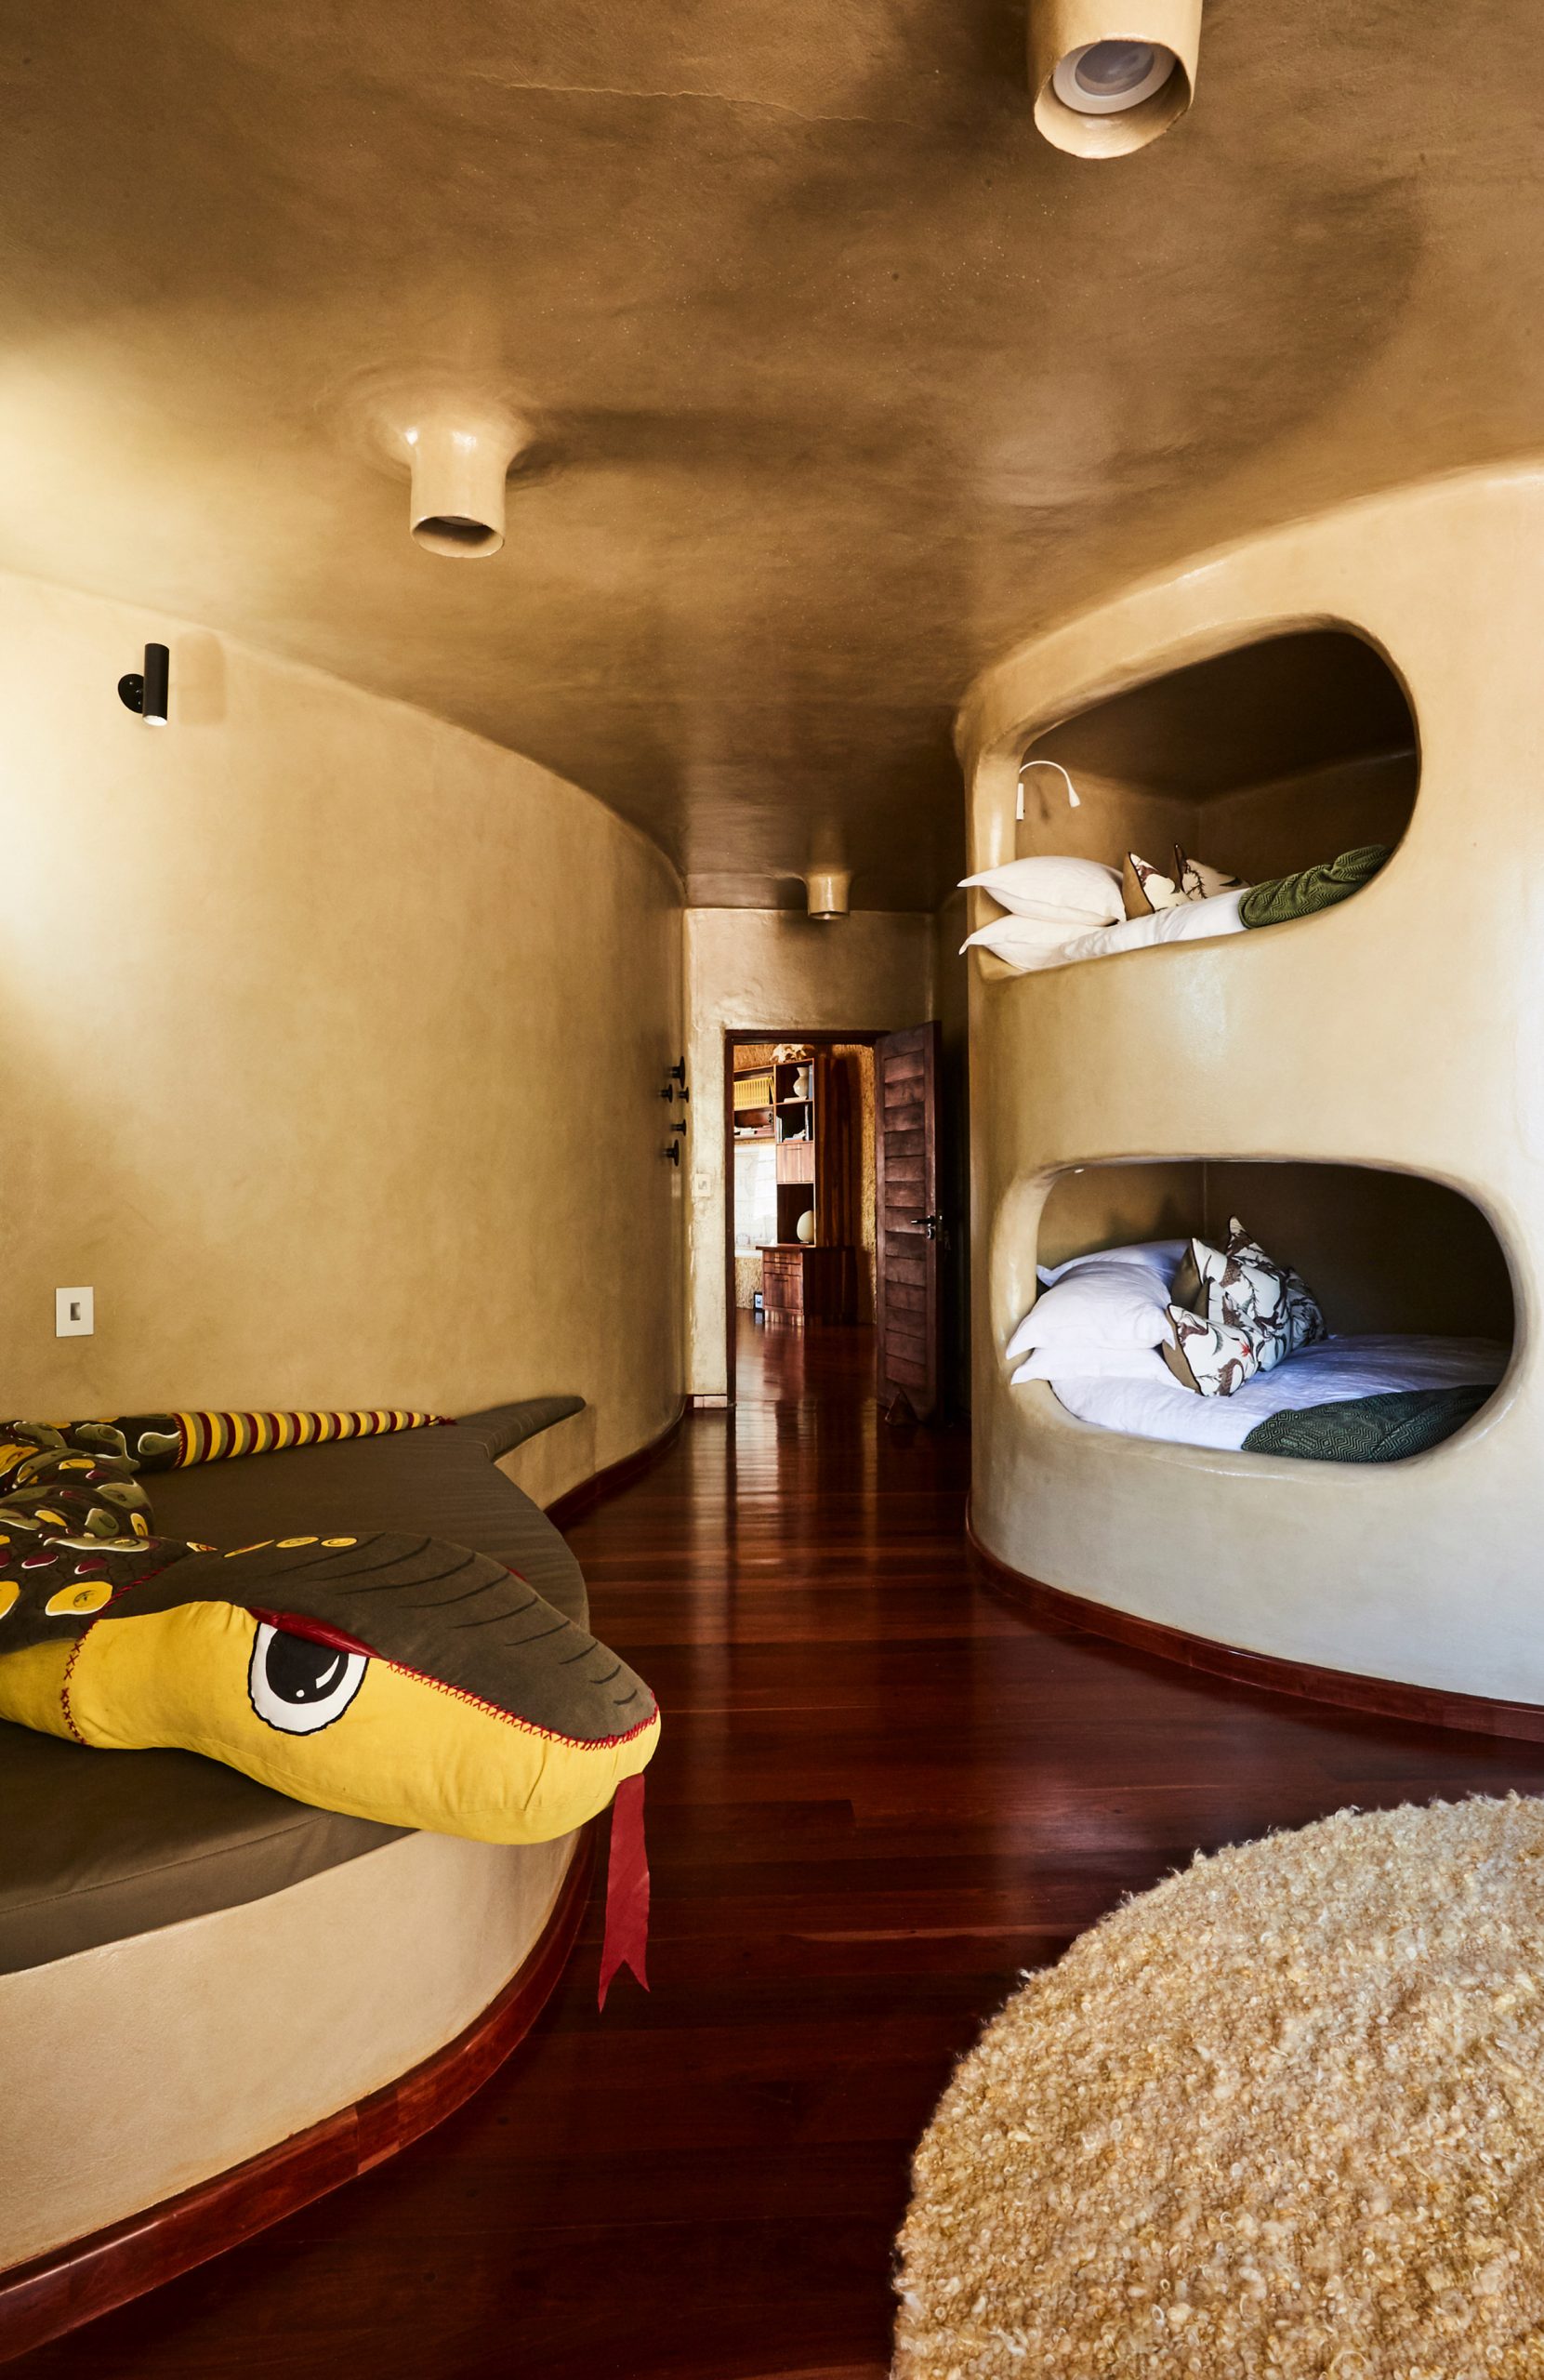 The Nest at Sossus guest house in Namibia designed by Porky Hefer